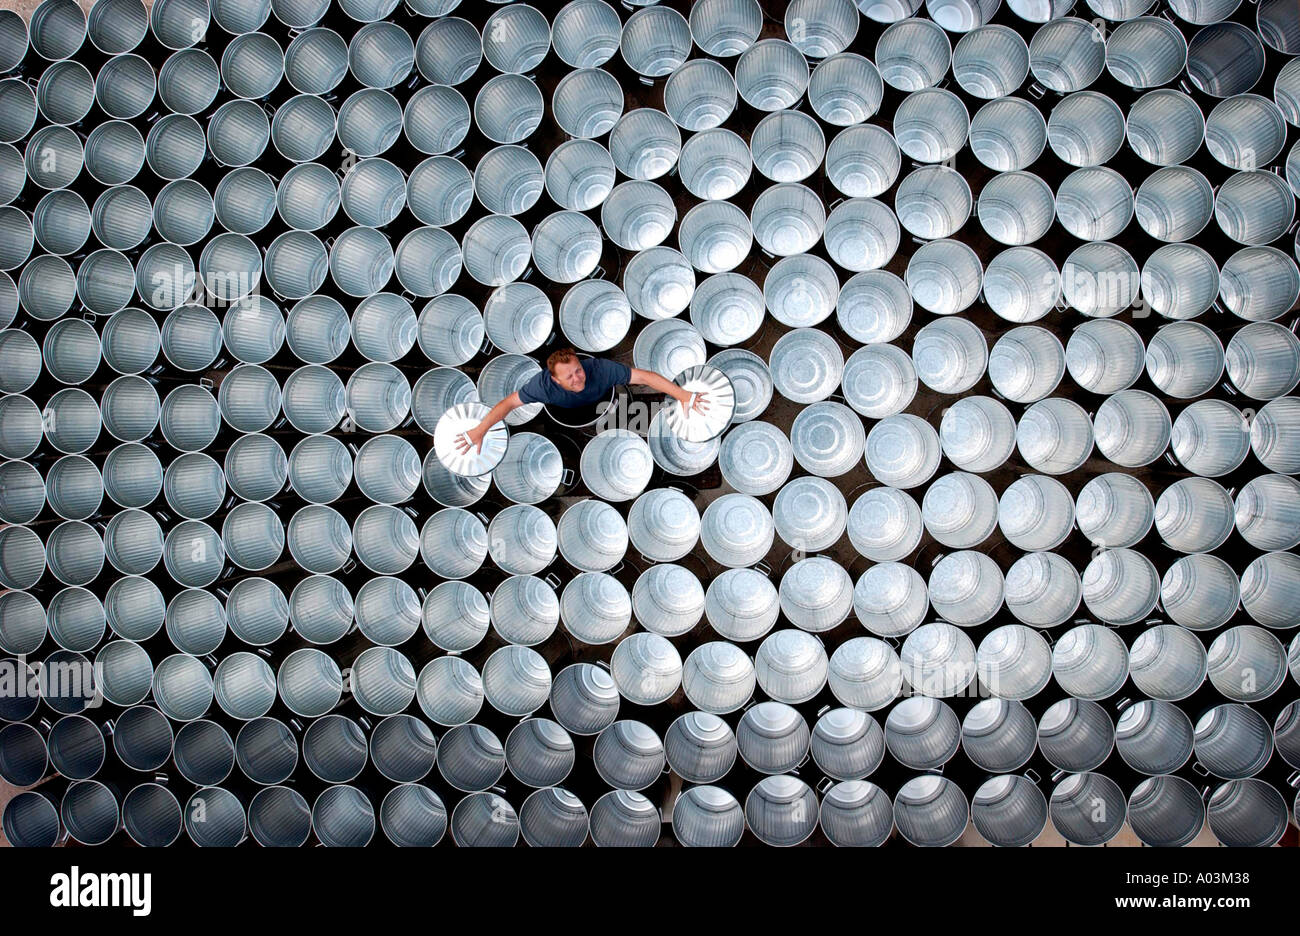 Stomp star Luke Cresswell and gleaming galvanised bins used to make percussion music on stage. Stock Photo